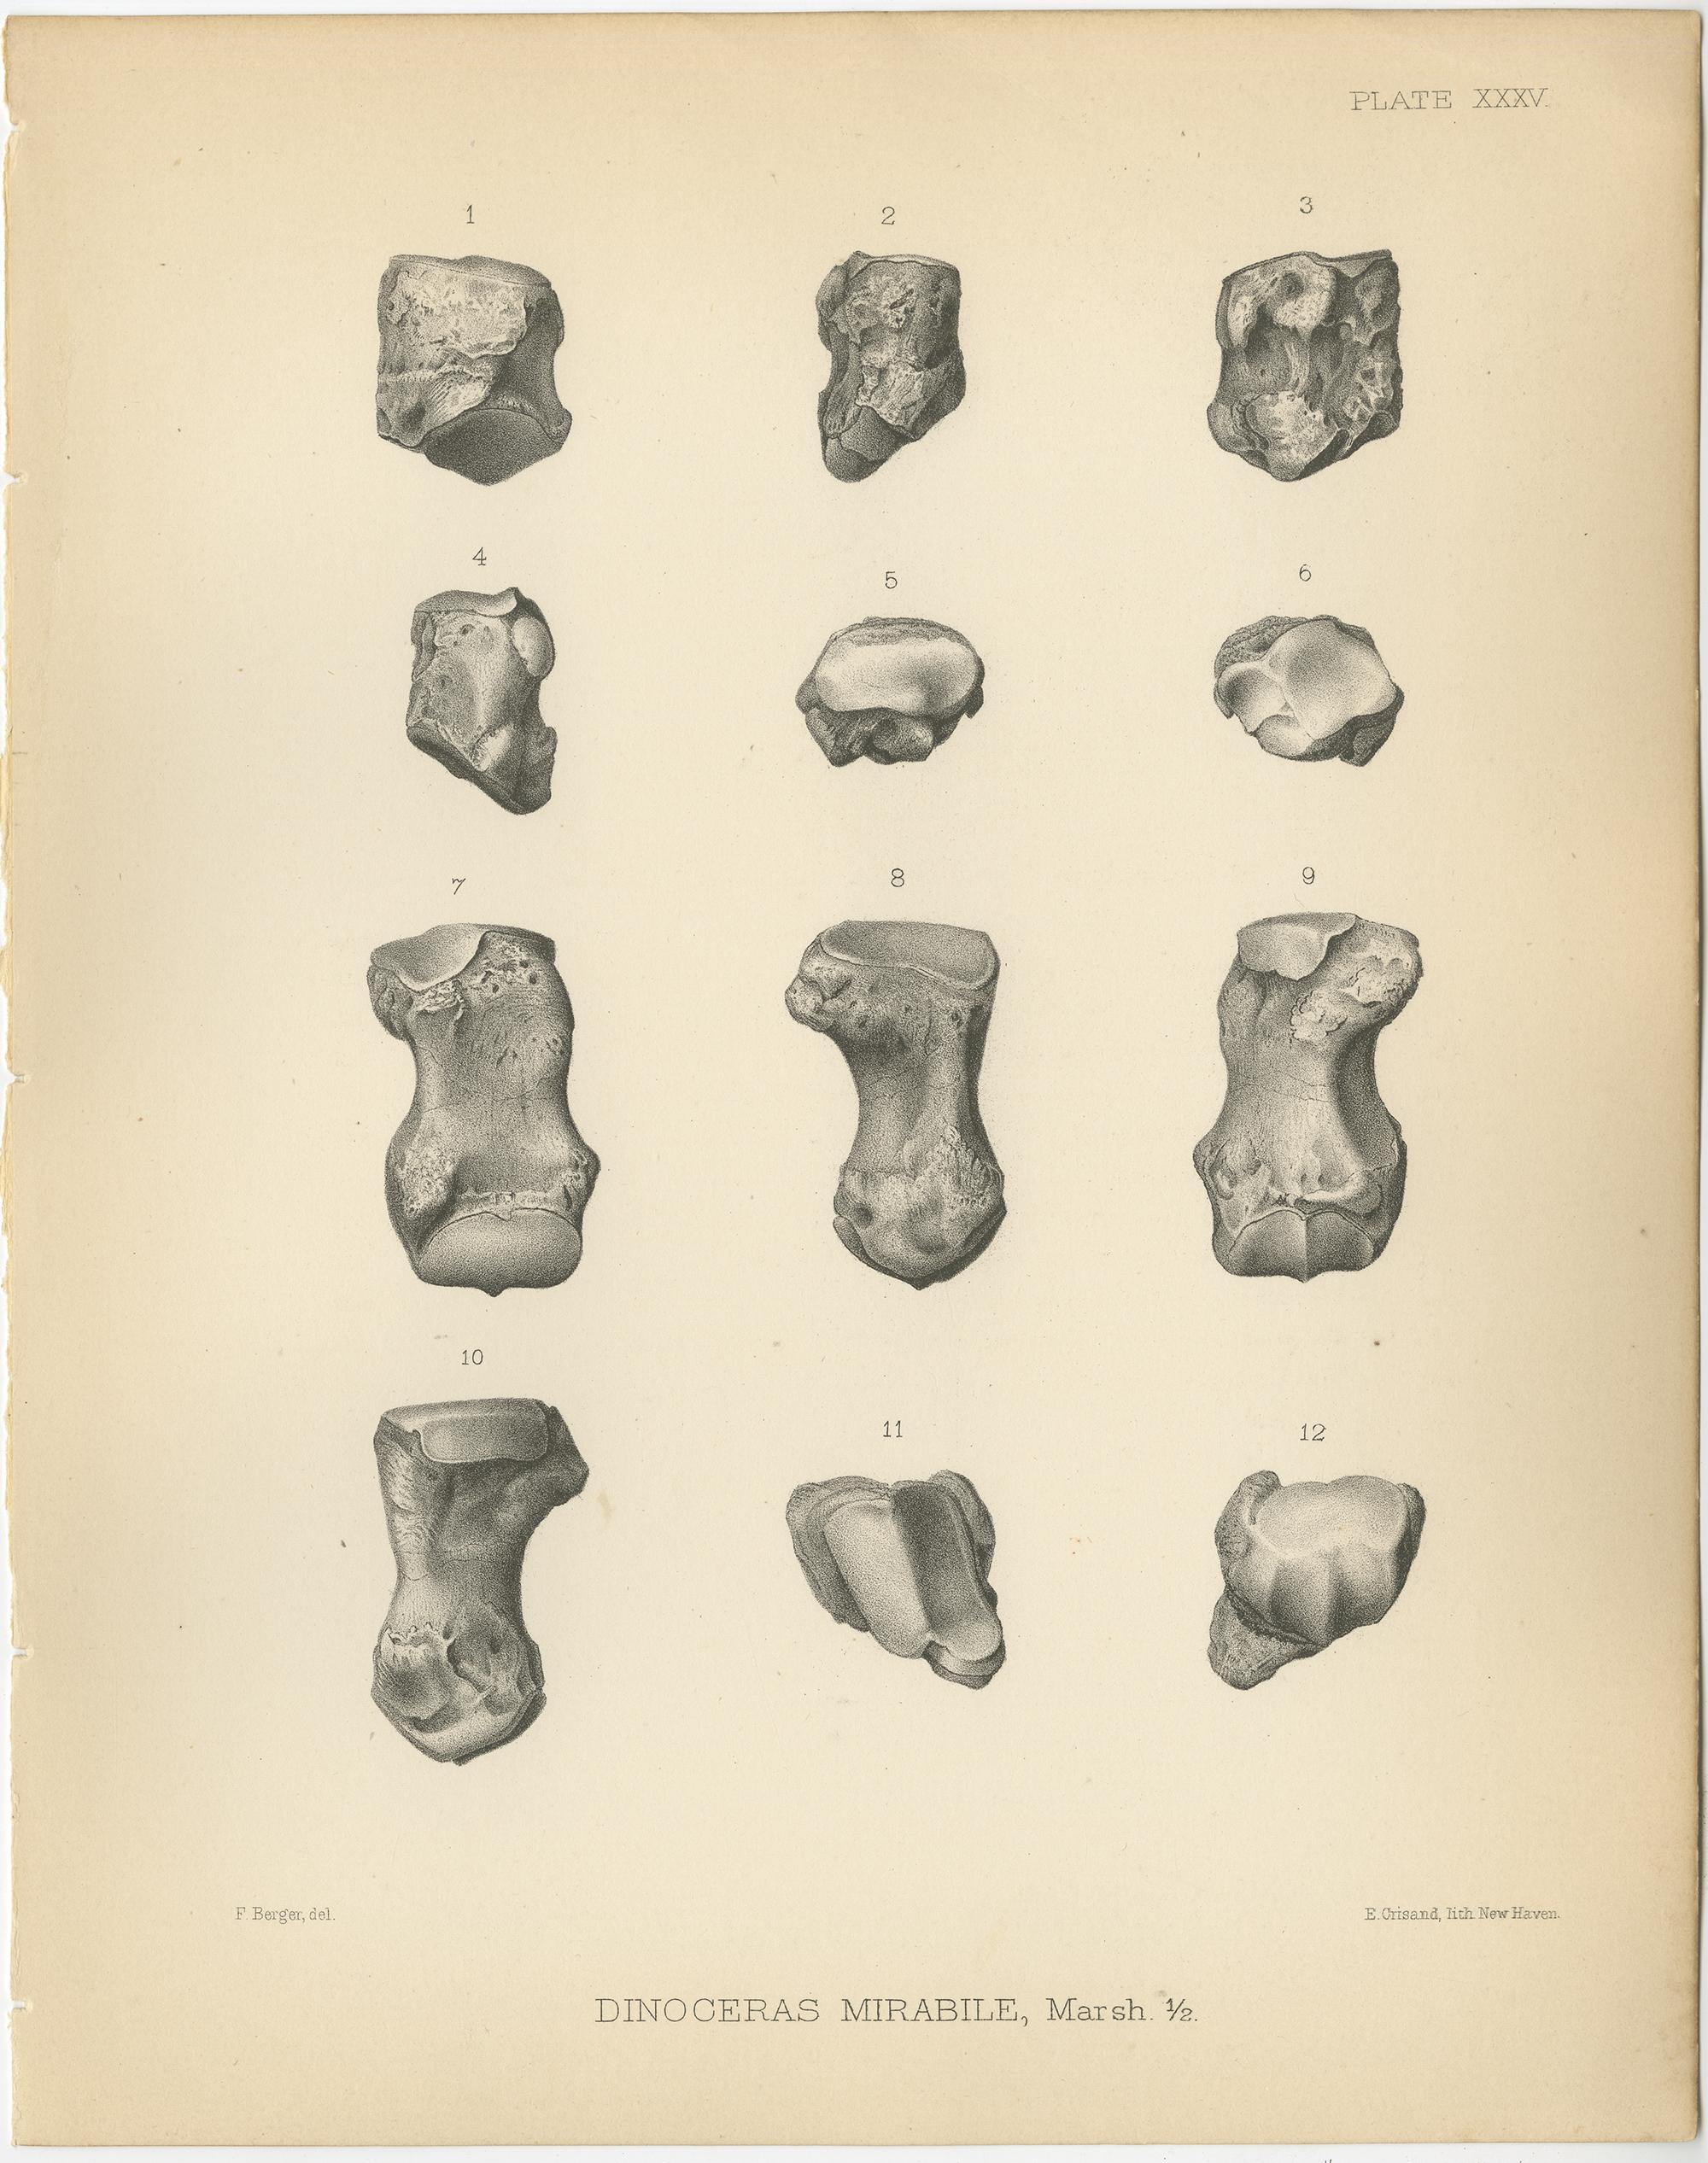 Set of three antique prints titled 'Dinoceras Mirabile'. Original lithograph of the metacarpals of a Dinoceras Mirabile, an extinct genus of herbivorous mammal. This print originates from volume 10 of 'Monographs of the United States Geological